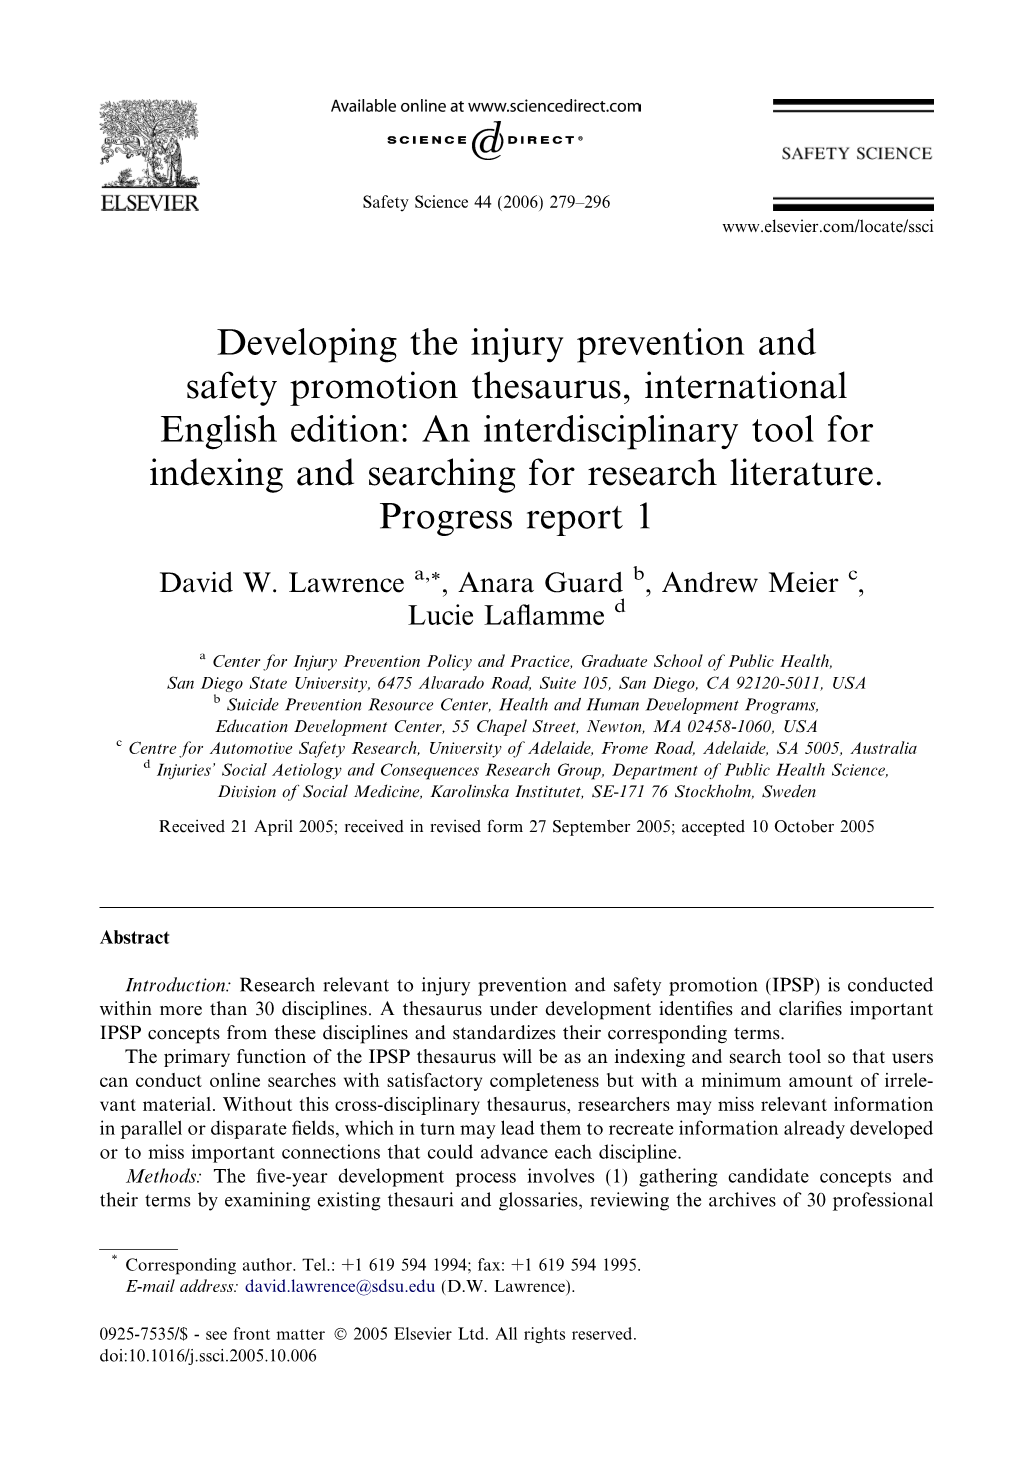 Developing the Injury Prevention and Safety Promotion Thesaurus